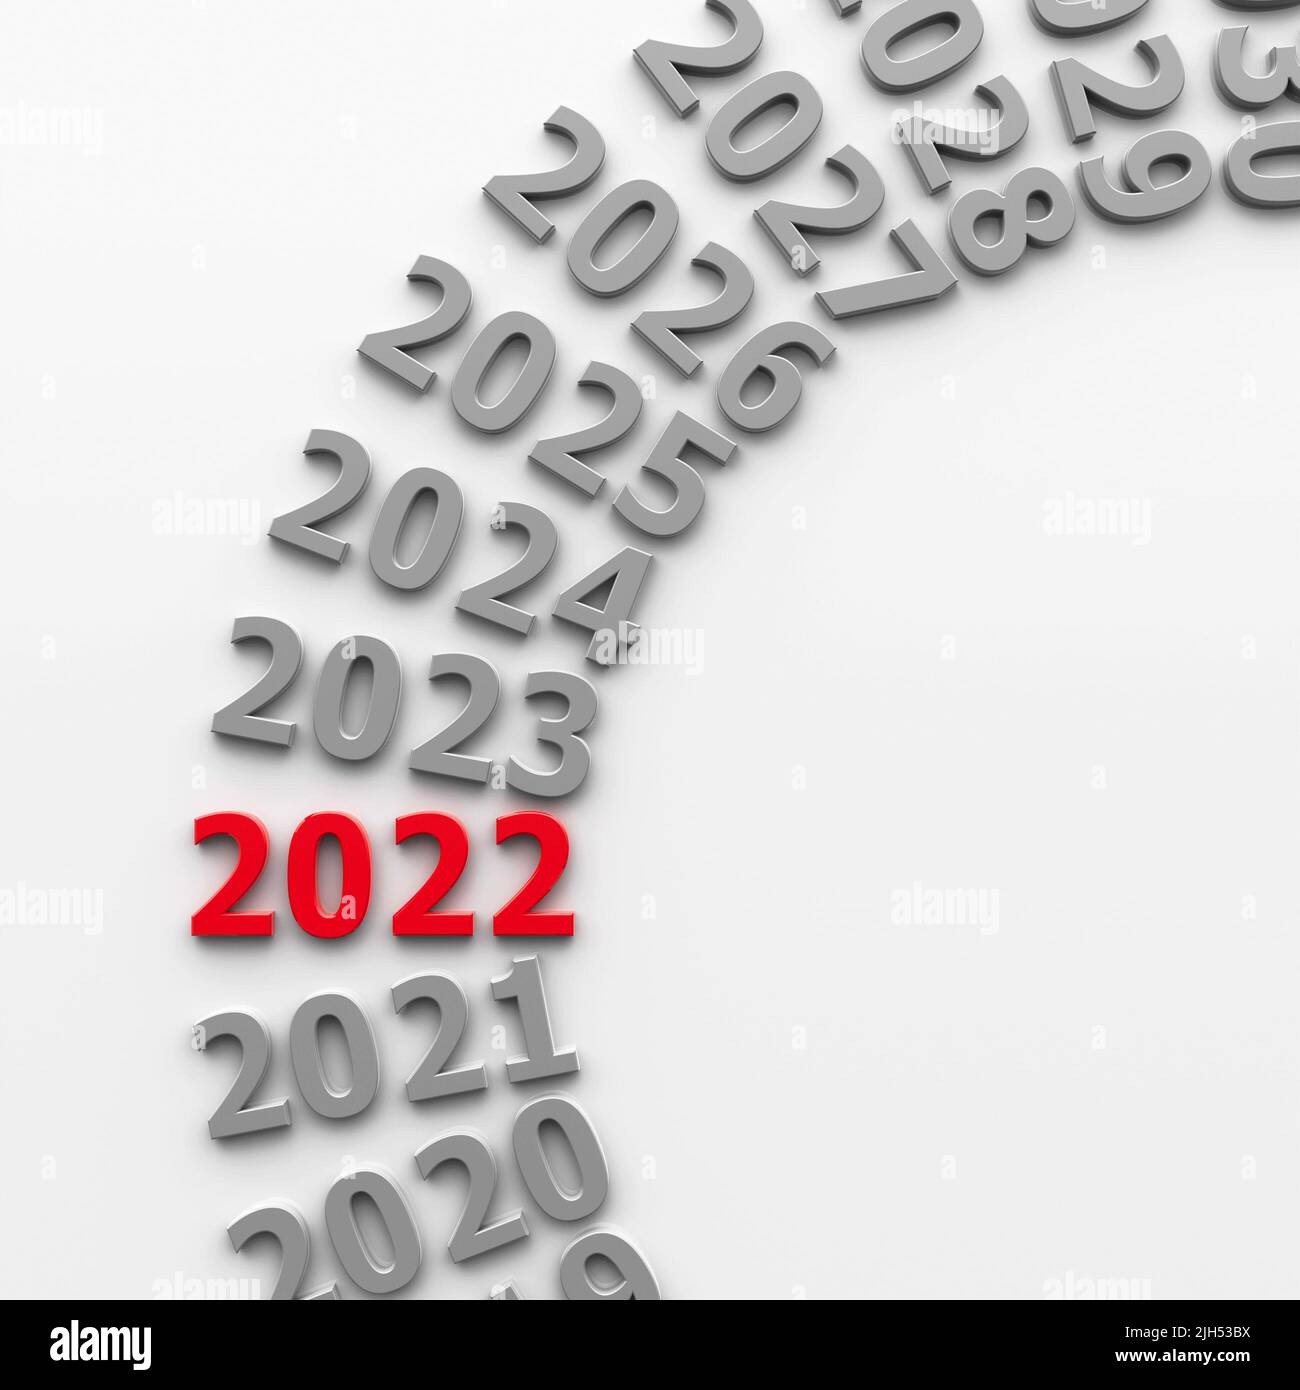 2022 future in the circle represents the new year 2022, three-dimensional rendering, 3D illustration Stock Photo